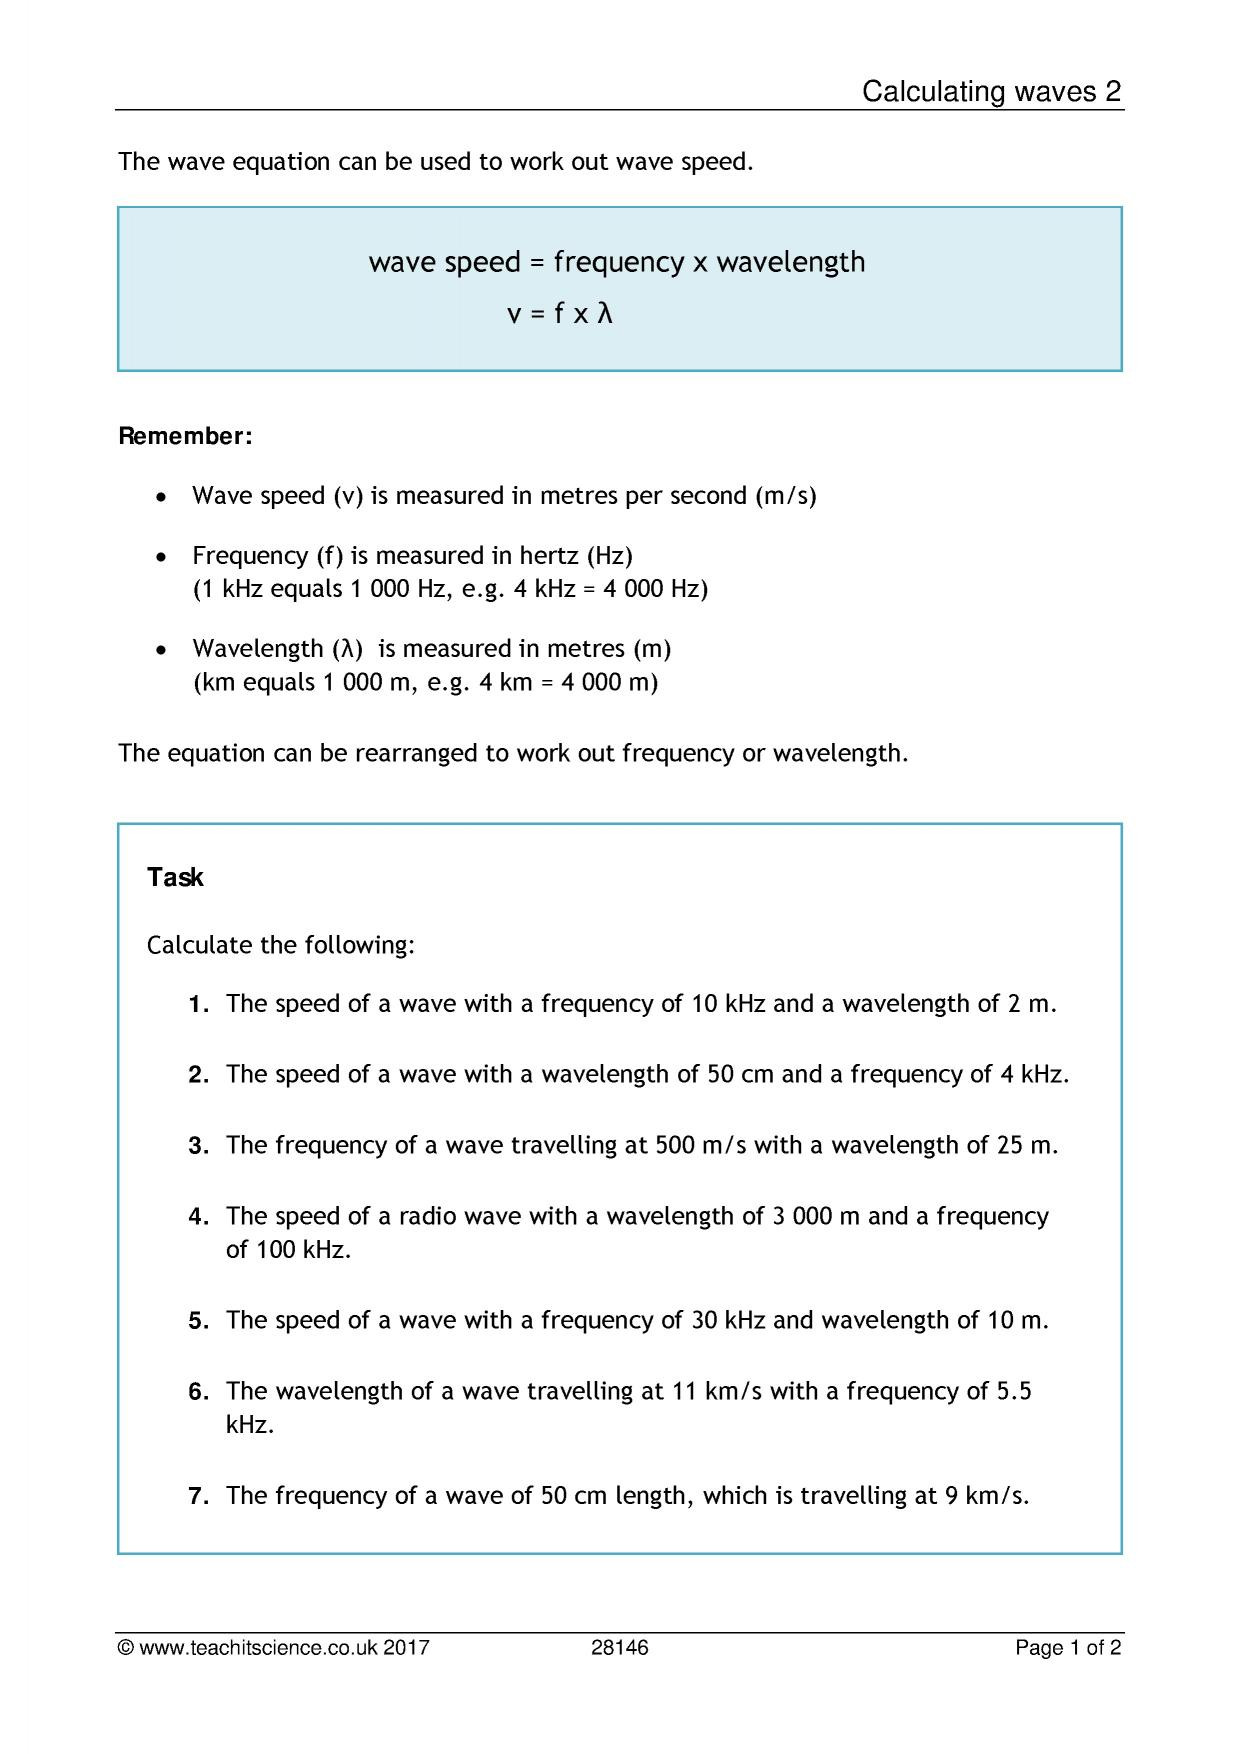 Waves Worksheet 1 Answers Calculating Wave Speed Frequency and Wavelength Worksheet